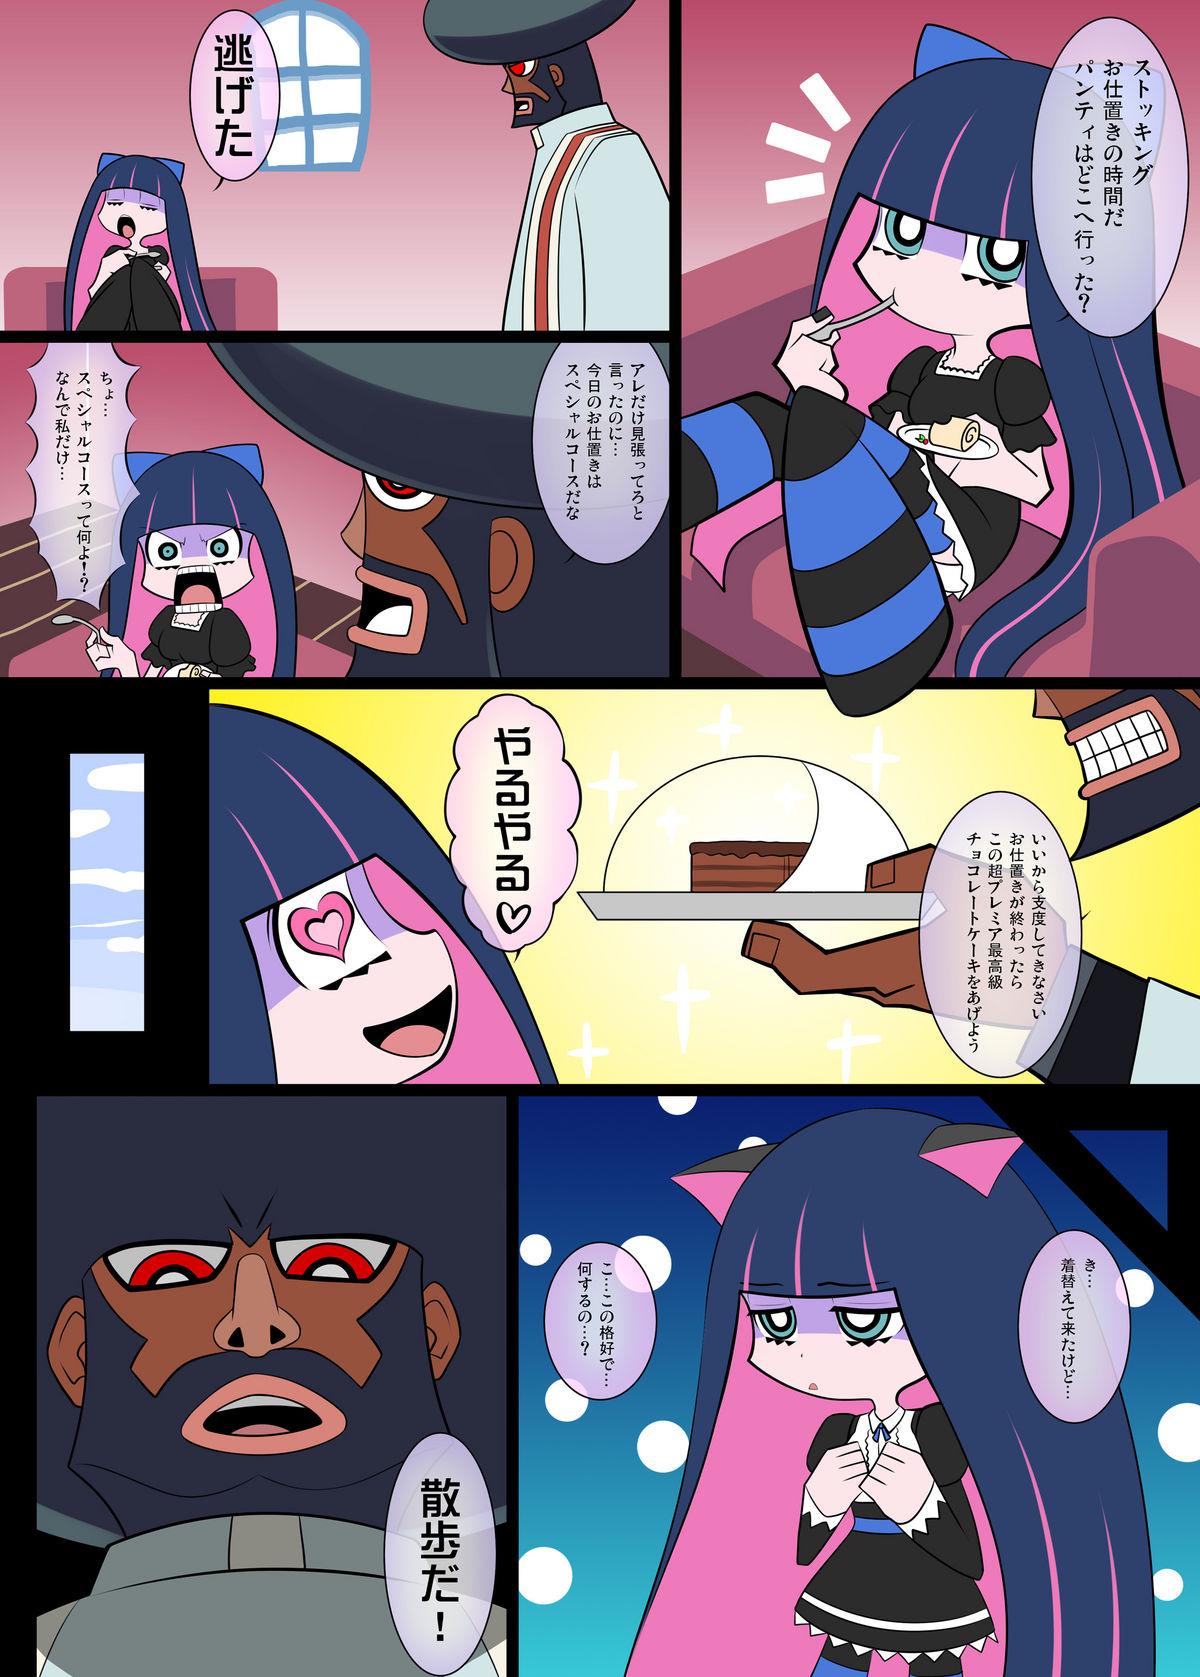 Blow Job Sperma & Sweets with Villager - Panty and stocking with garterbelt Porno Amateur - Page 3